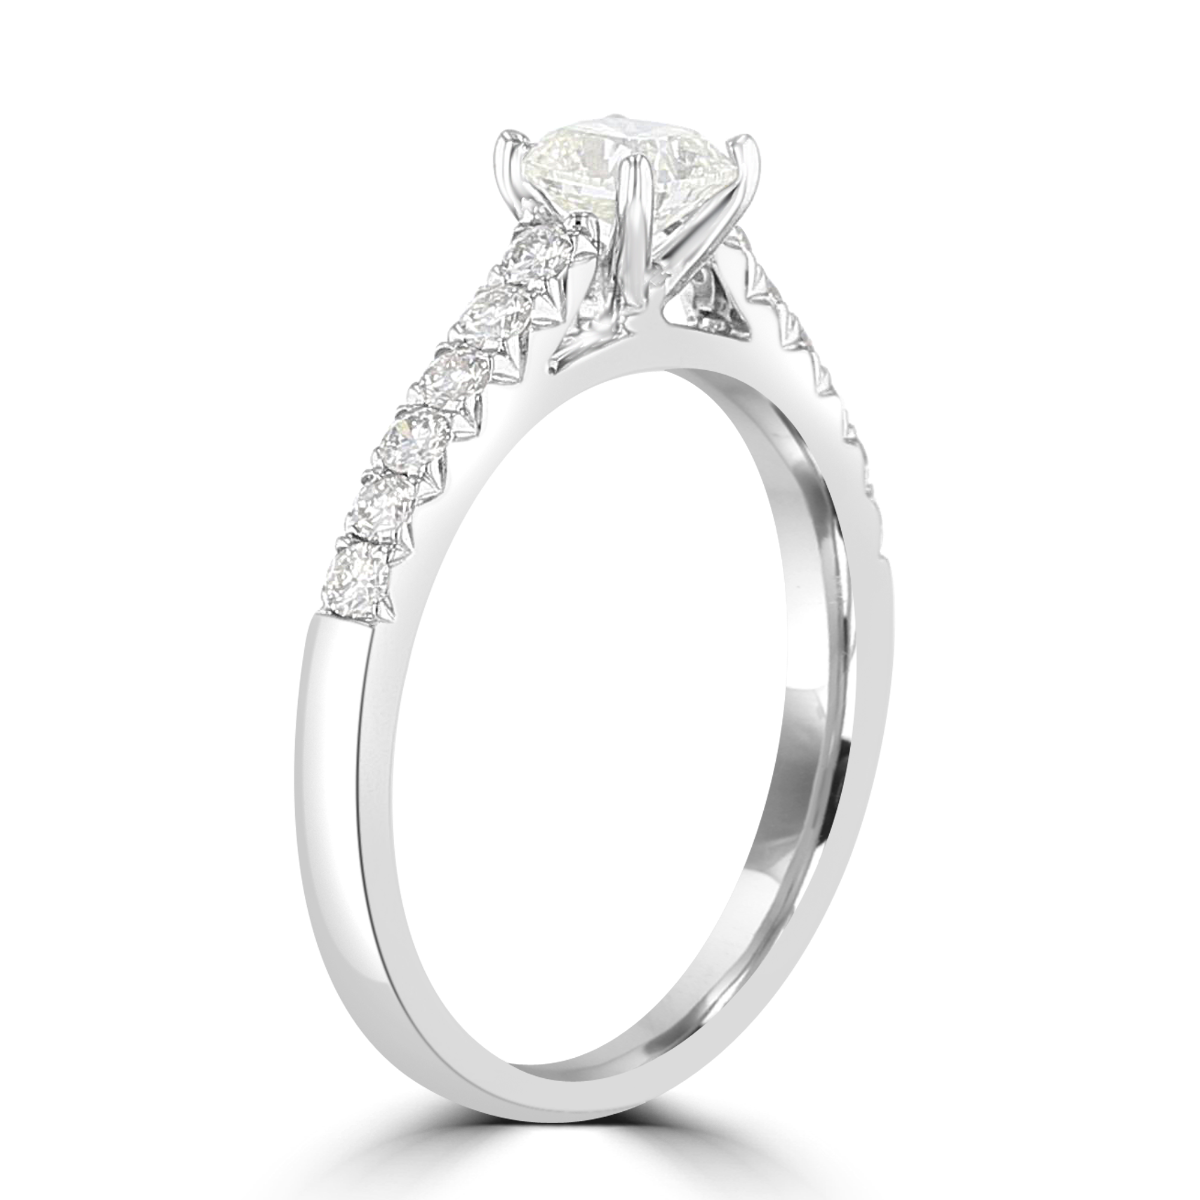 14KT White Gold 3/4 CTW Cushion Diamond Cathedral Ring 4,4.5,5,5.5,6,6.5,7,7.5,8,8.5,9